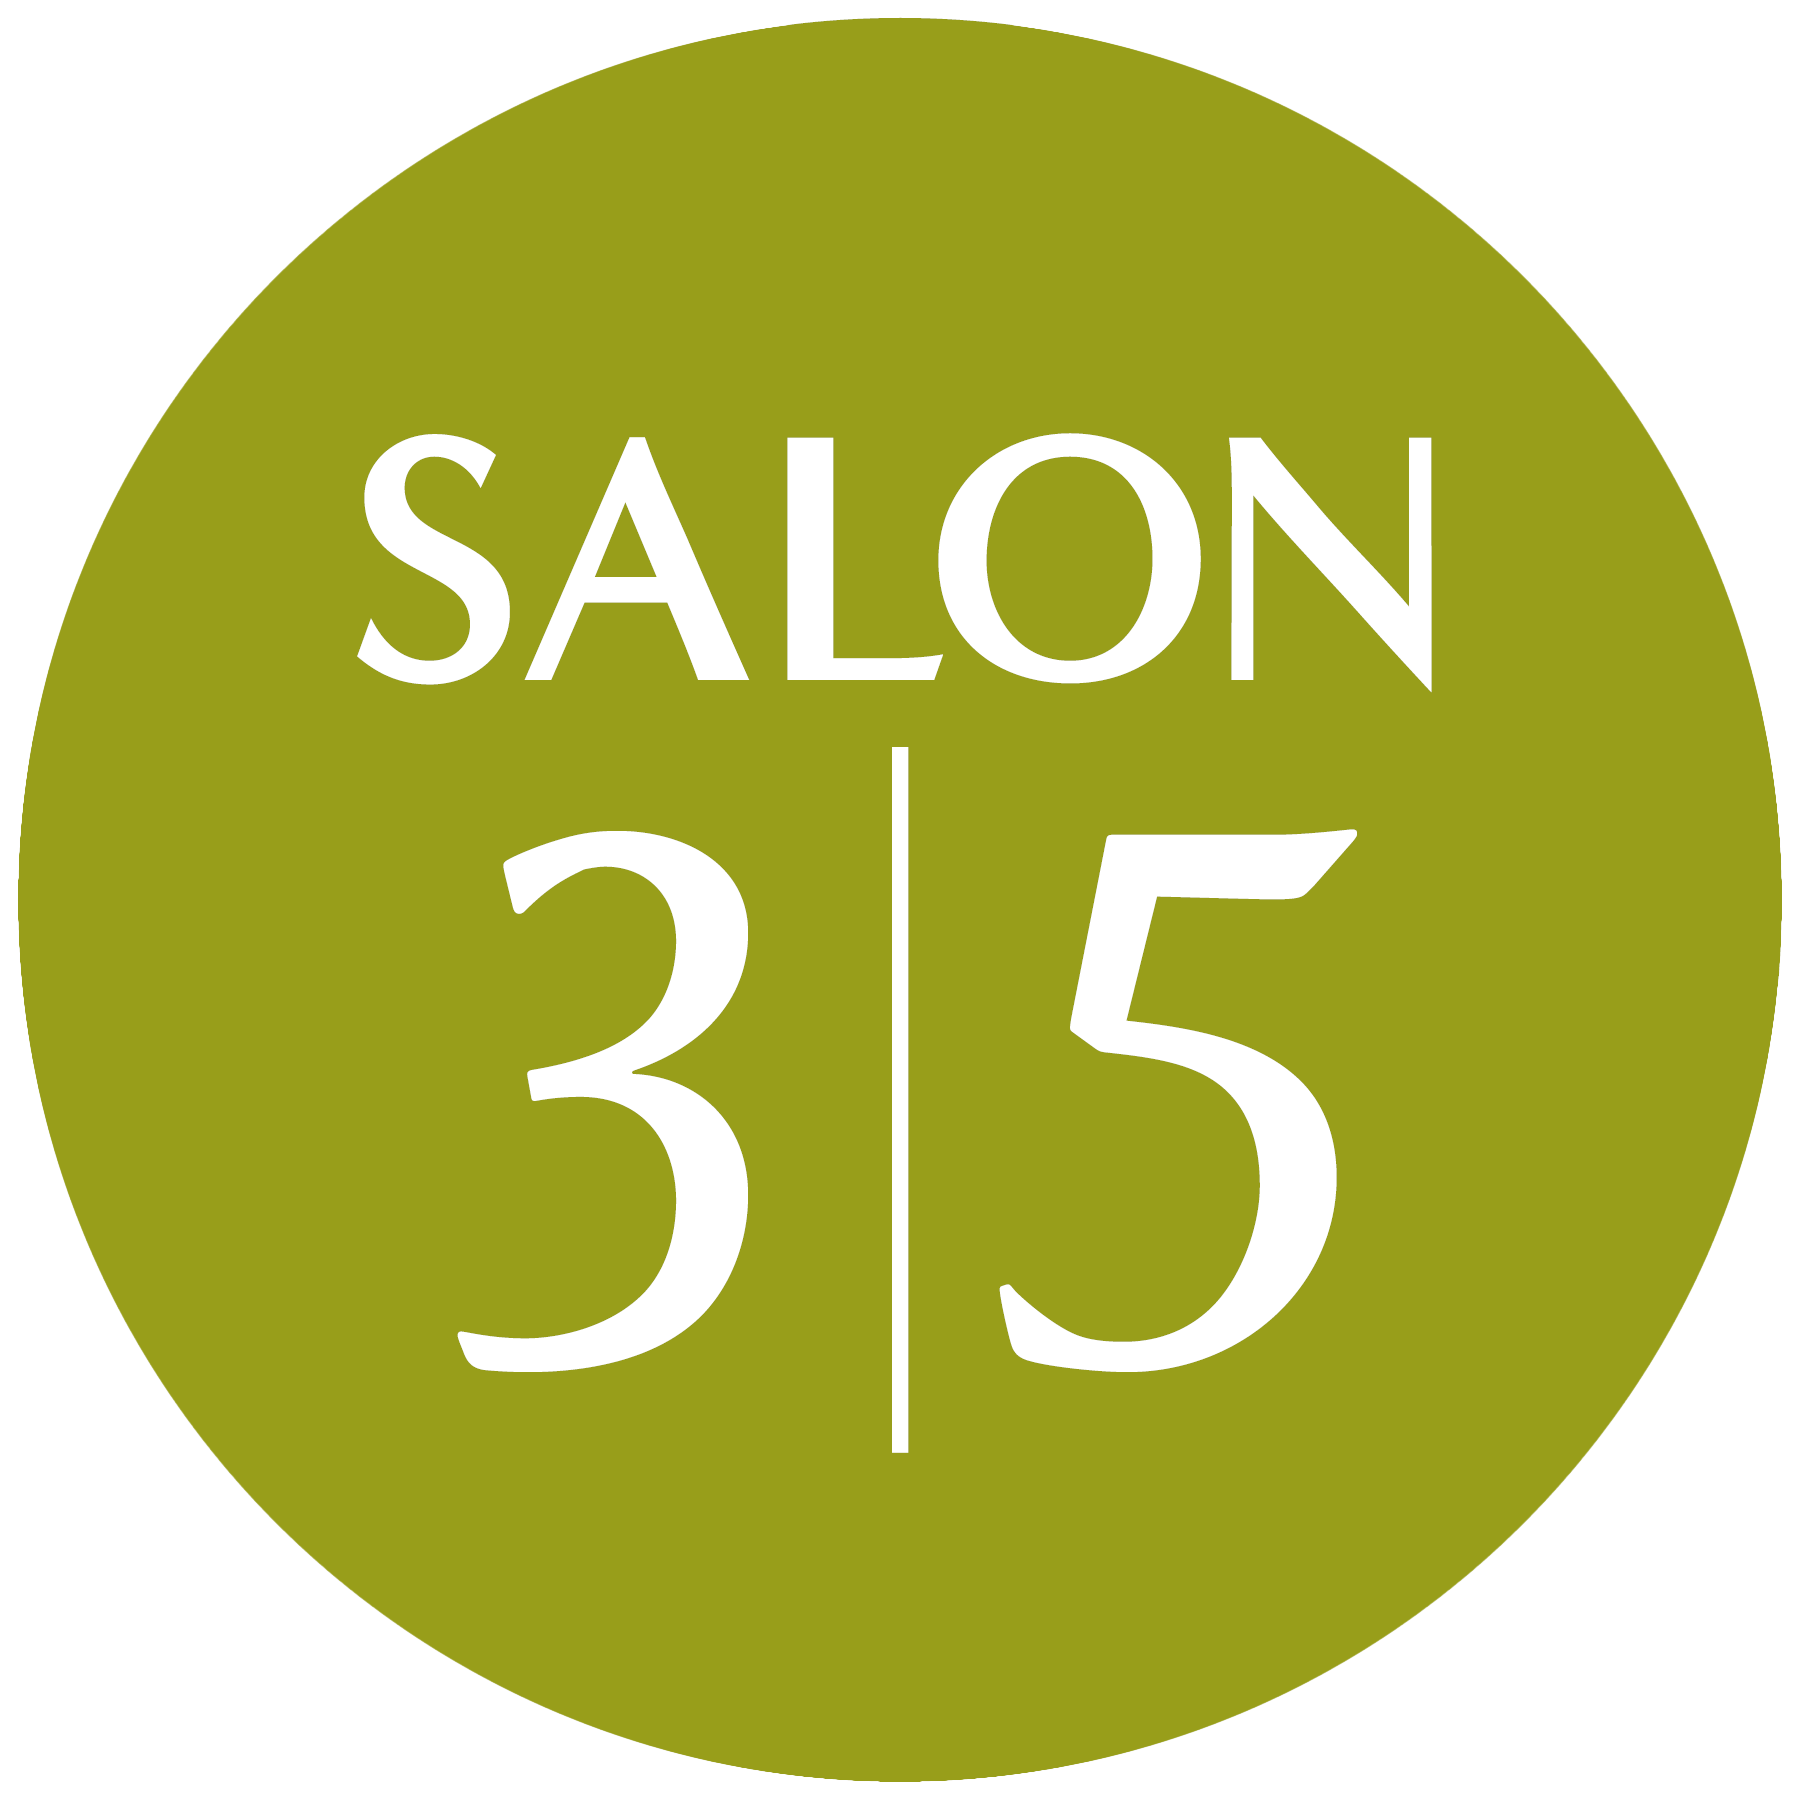 This Graphic shows the Salon 3 5 logo